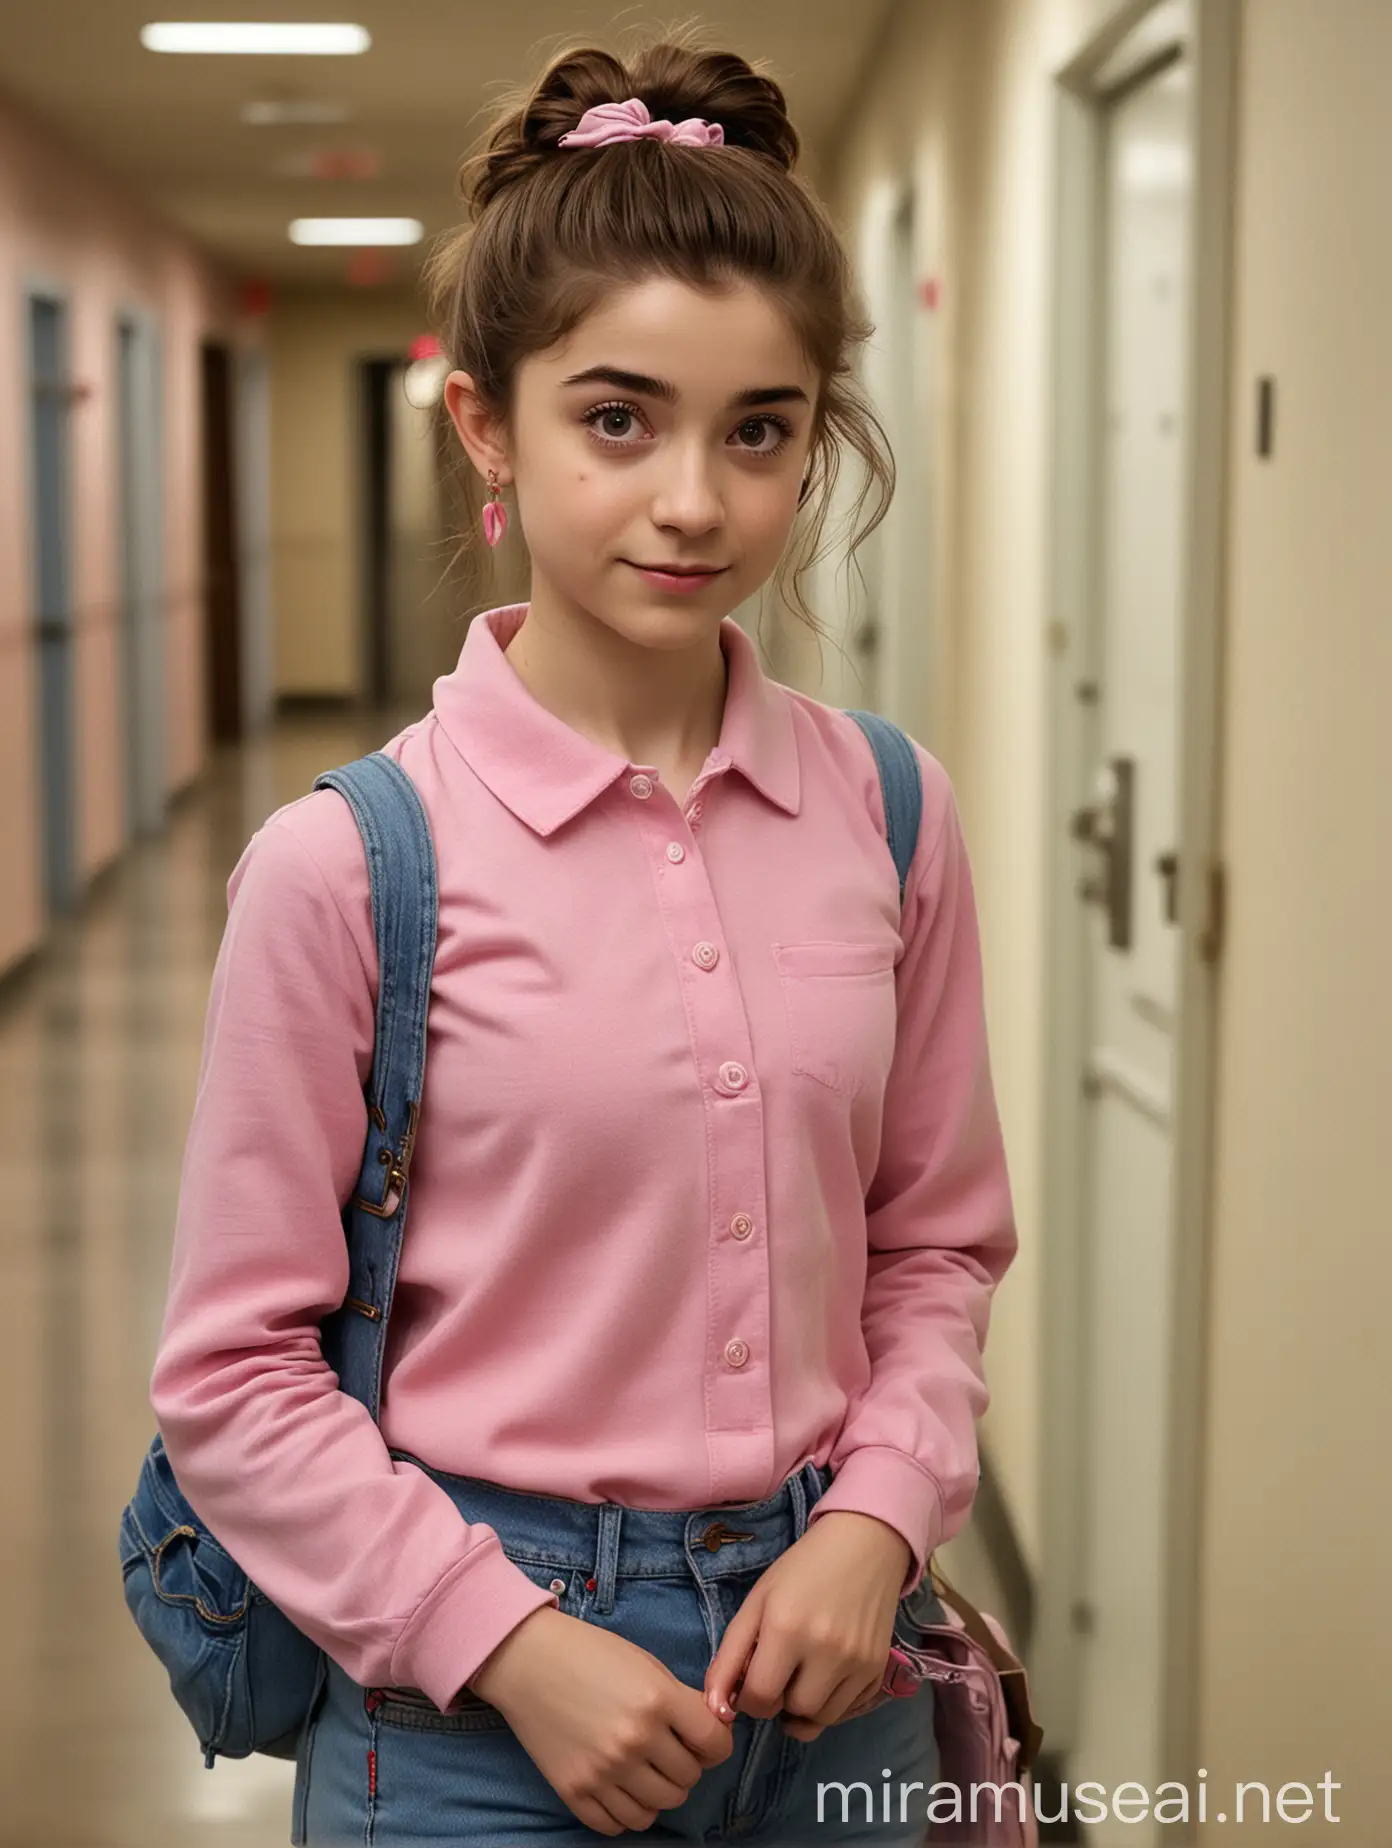 Natalia Dyer in University Hallway with Mauve Polo and Textbooks